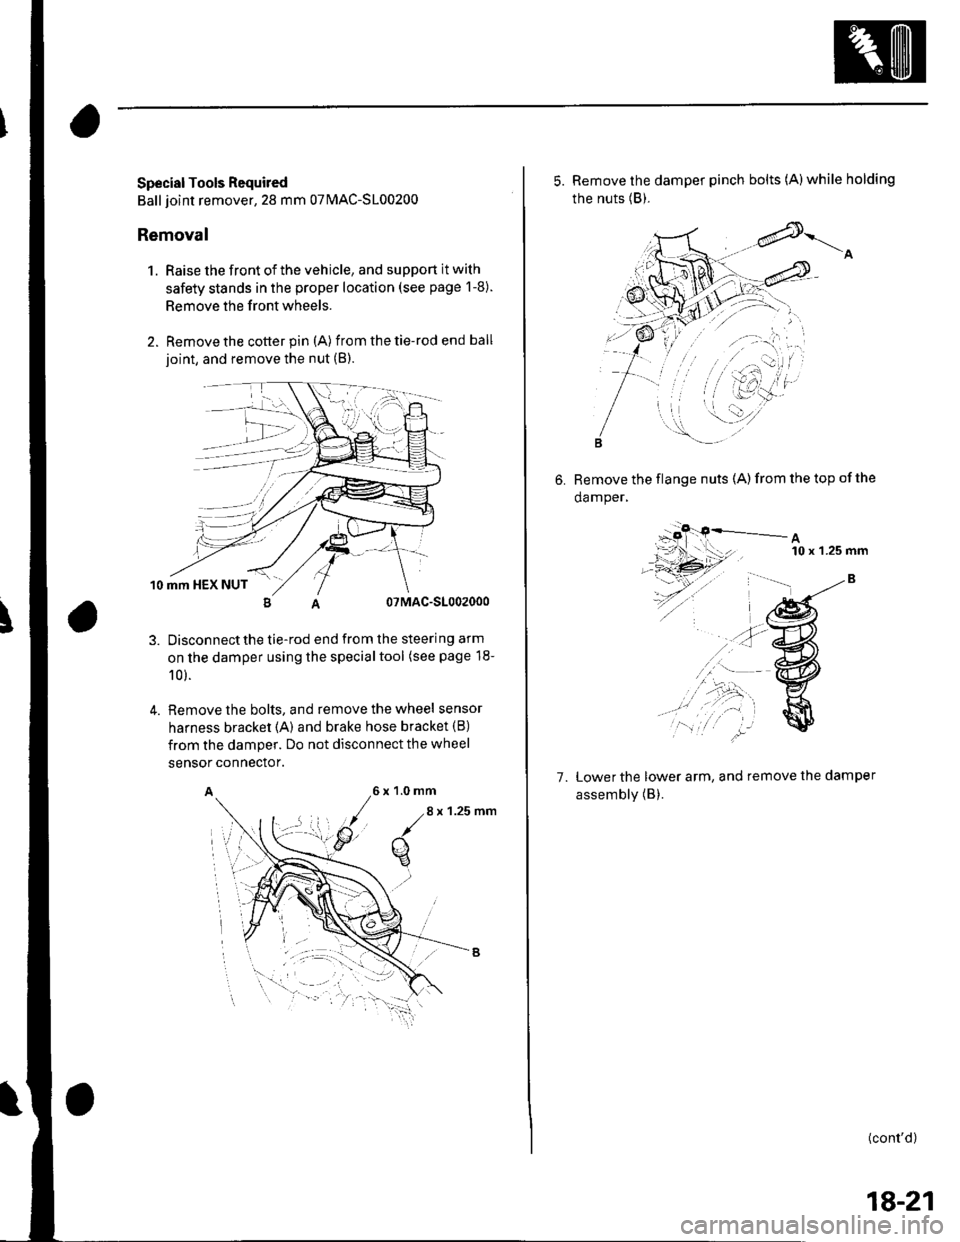 HONDA CIVIC 2003 7.G Workshop Manual Special Tools Required
Ball joint remover,28 mm 07MAC-S100200
Removal
1. Raise the front of the vehicle, and support it with
safety stands in the proper location (see page 1-8).
Remove the front wheel